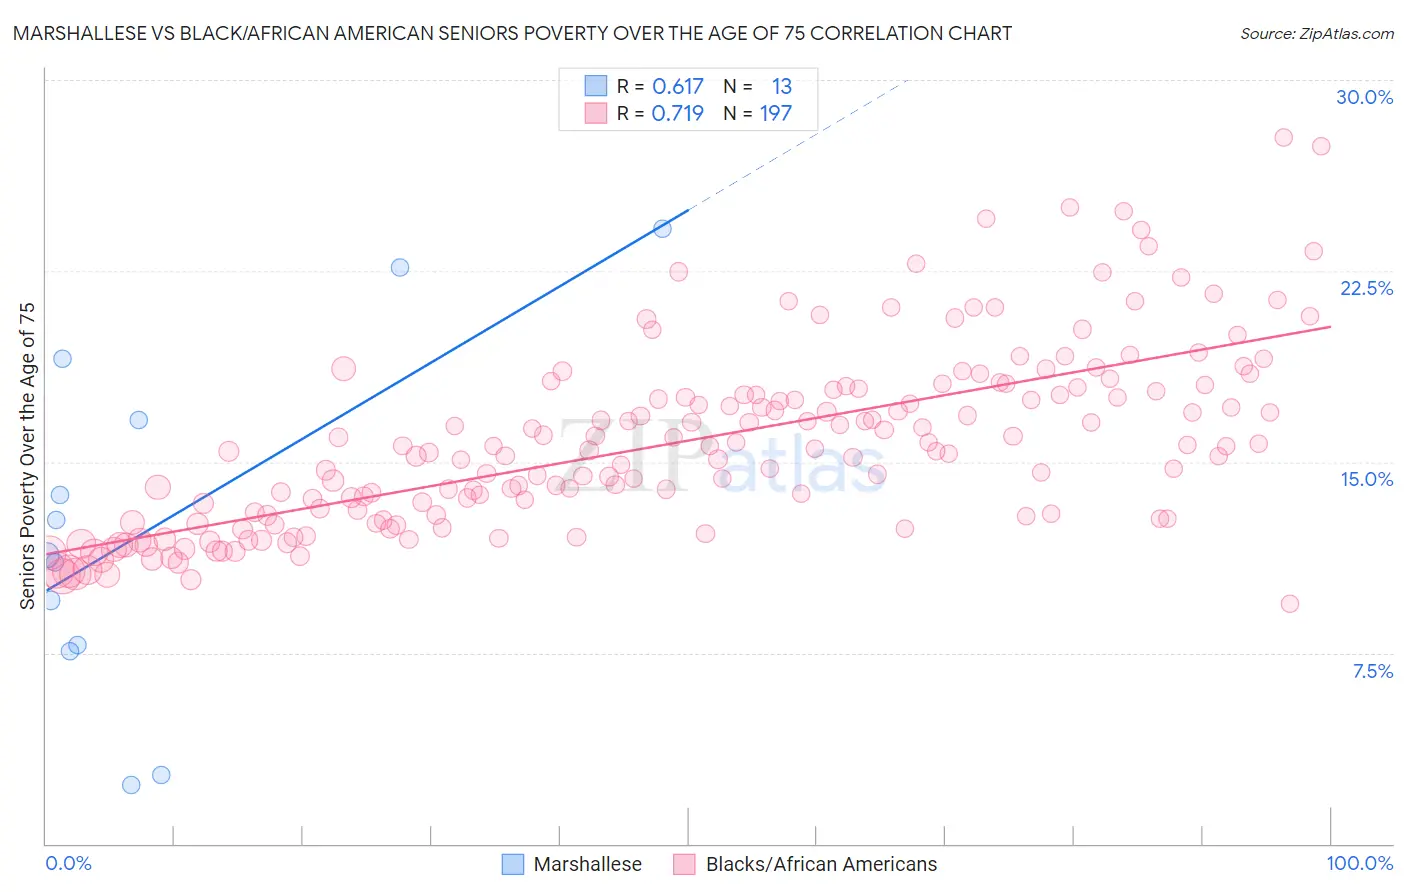 Marshallese vs Black/African American Seniors Poverty Over the Age of 75